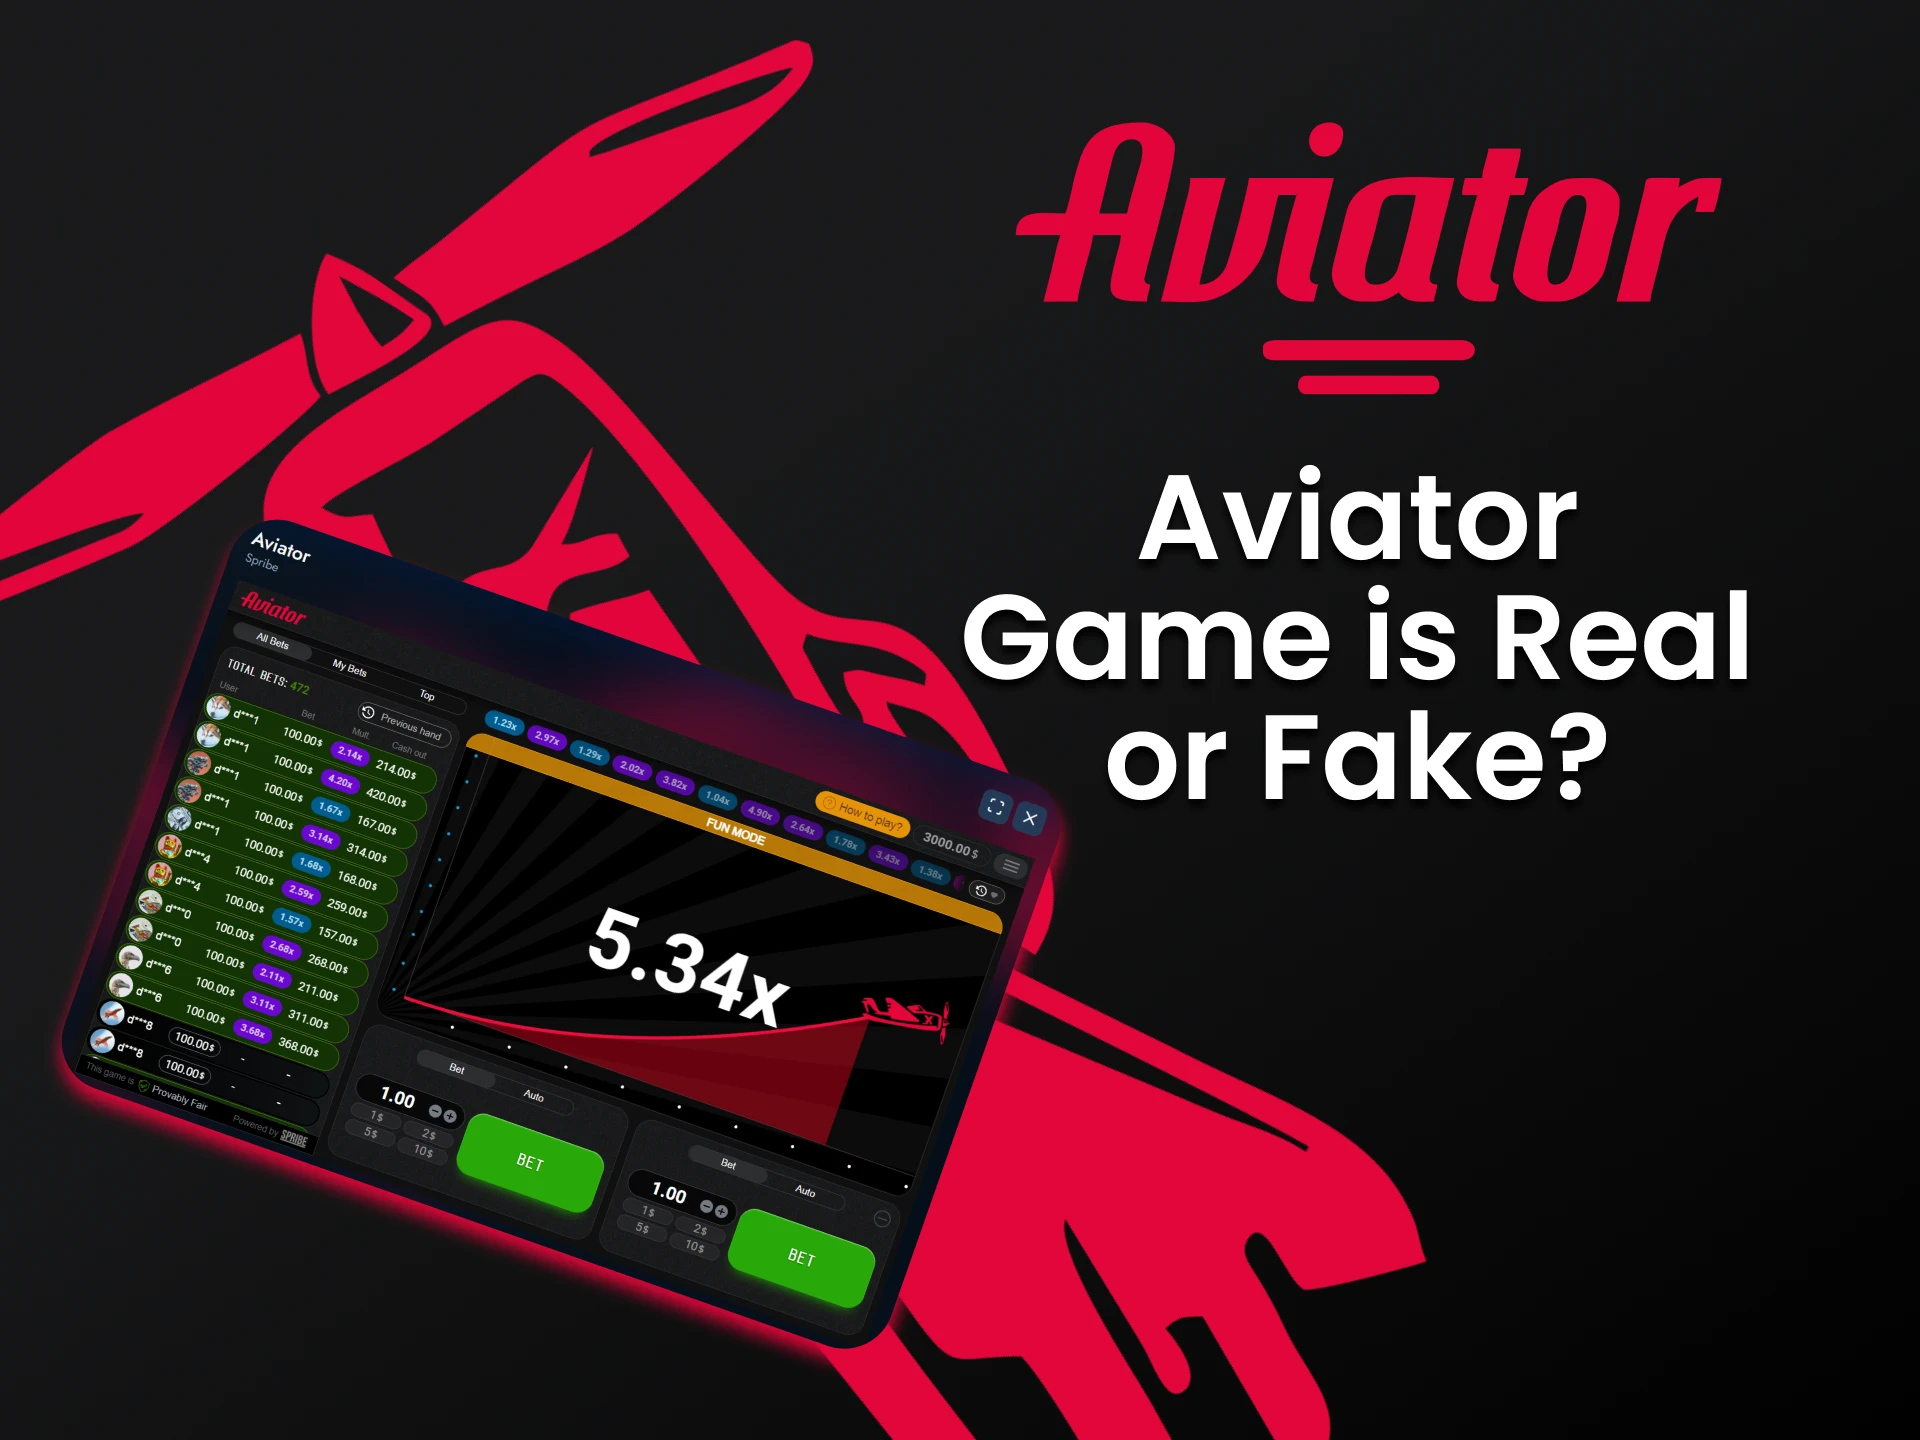 If you doubt the choice of a proven game, choose Aviator.